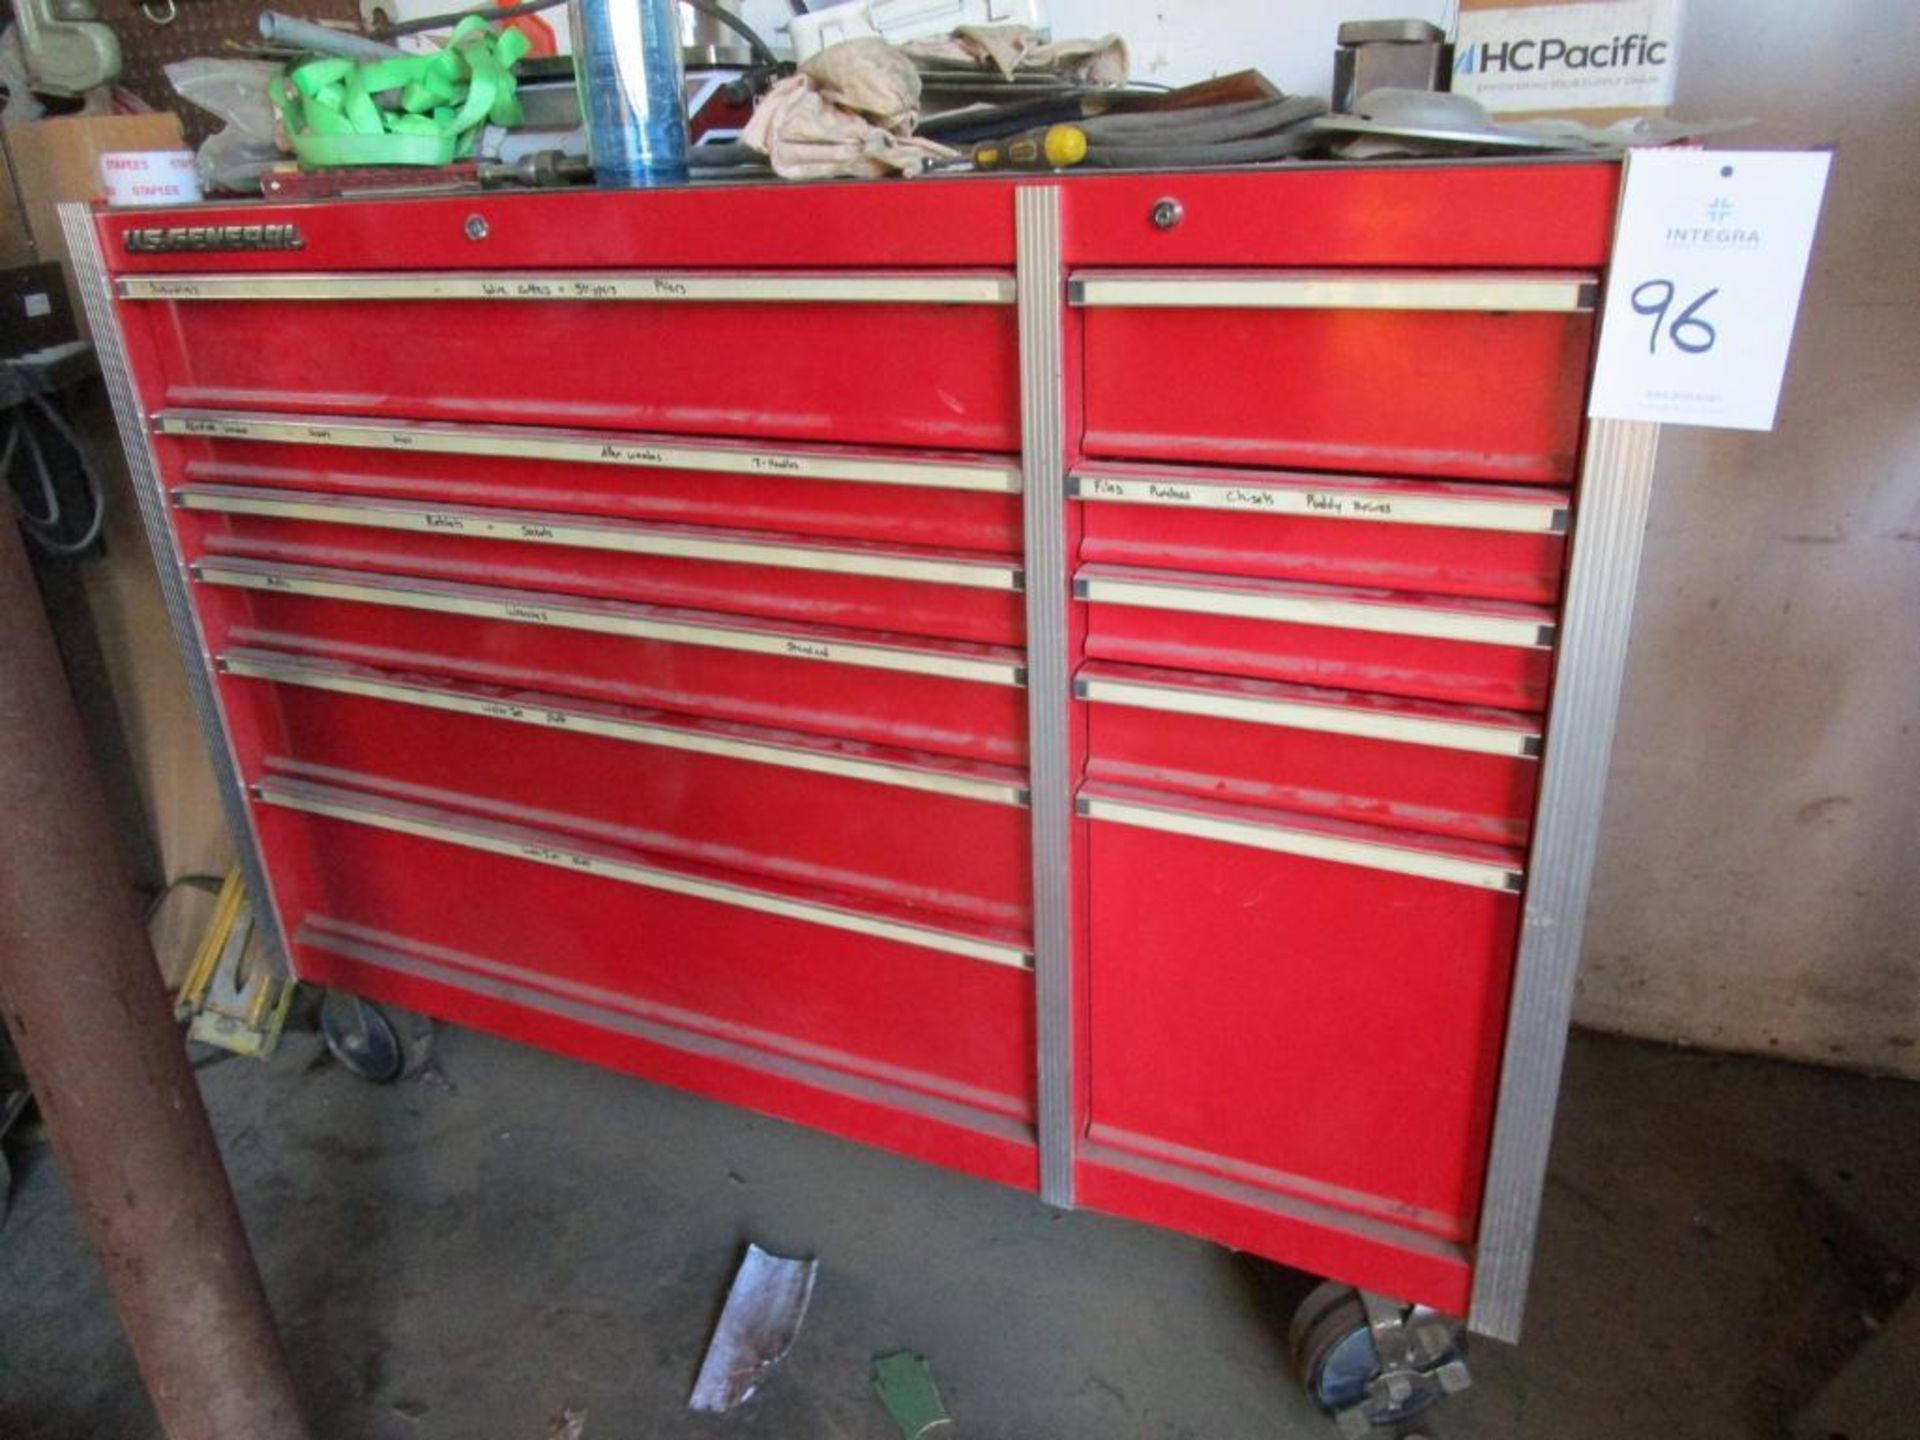 US General Portable Tool Chest